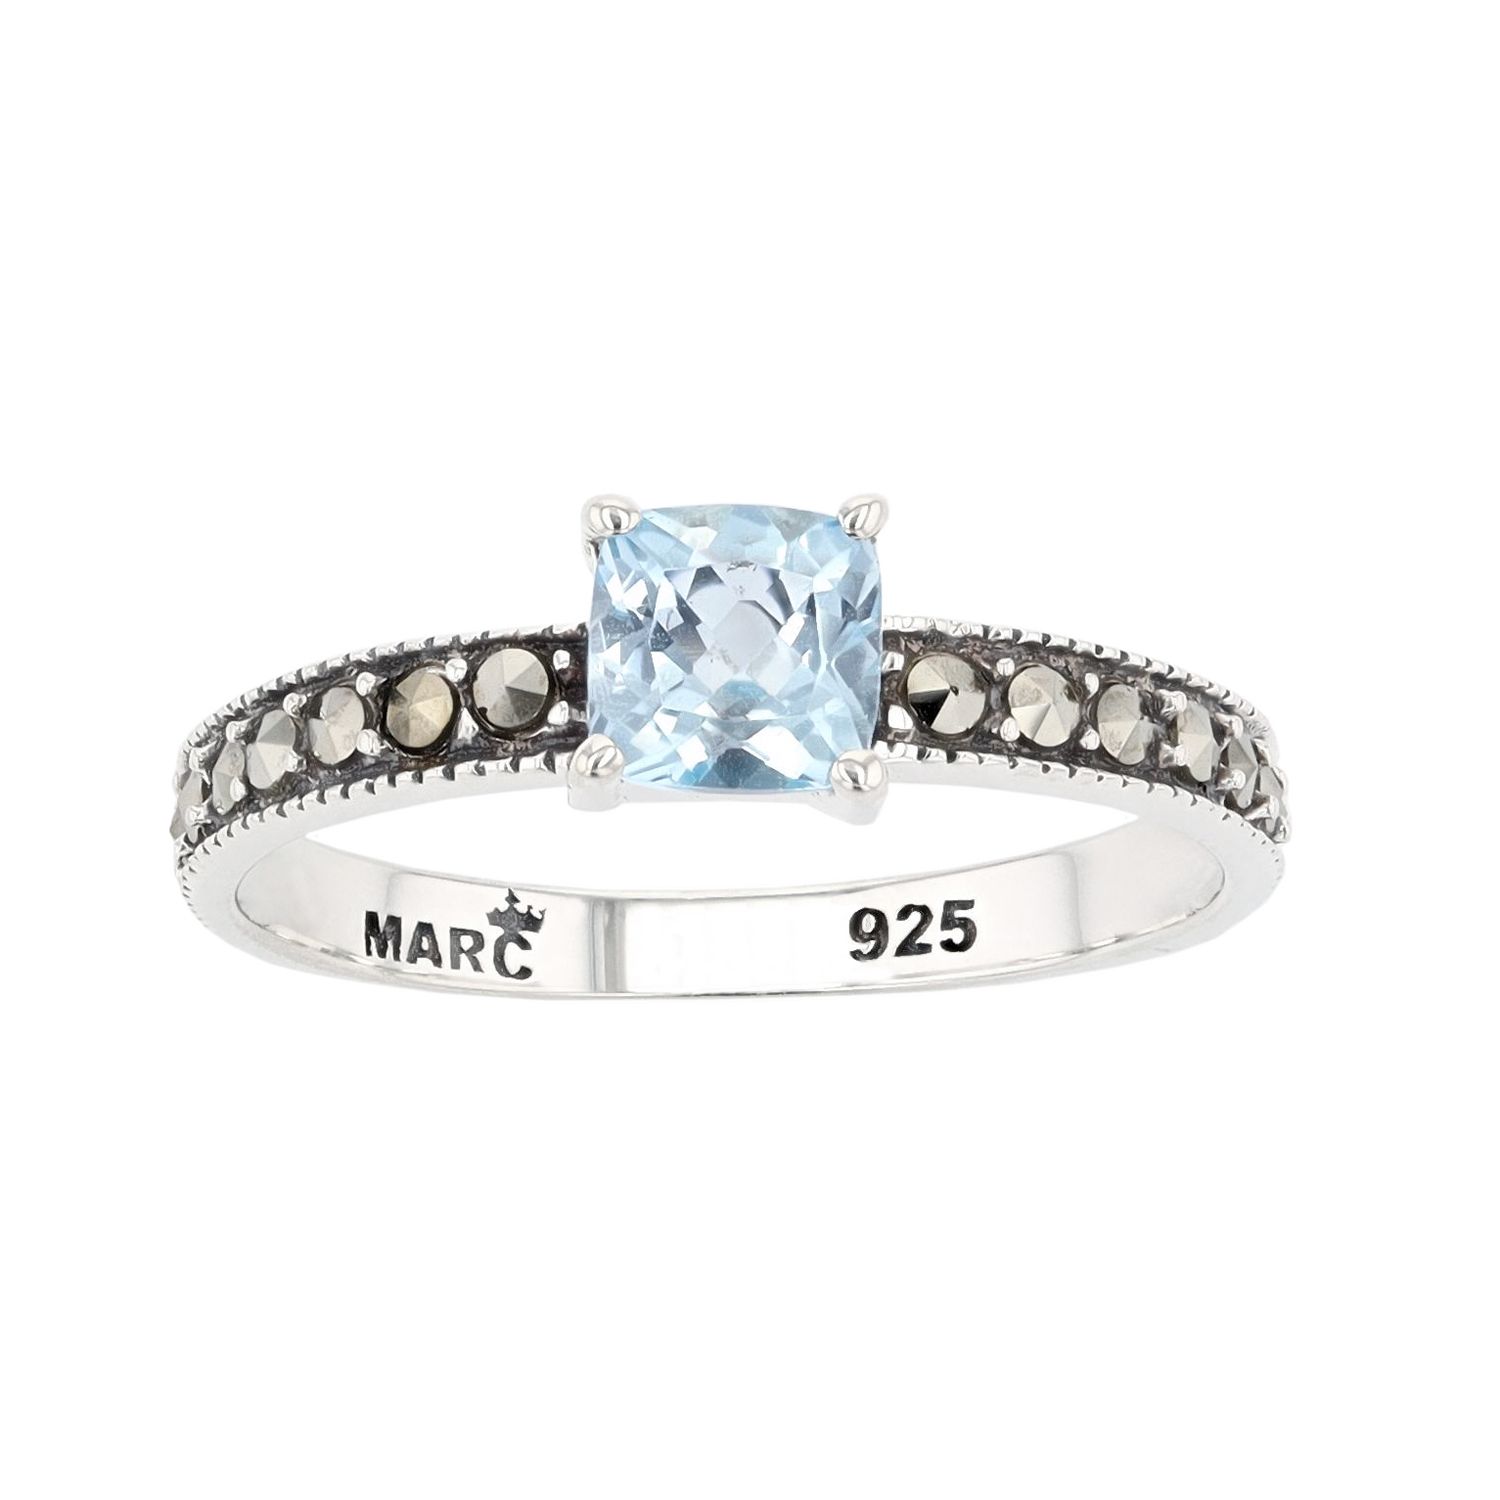 Image for Lavish by TJM Sterling Silver Cushion Cut Sky Blue Topaz & Marcasite Ring at Kohl's.